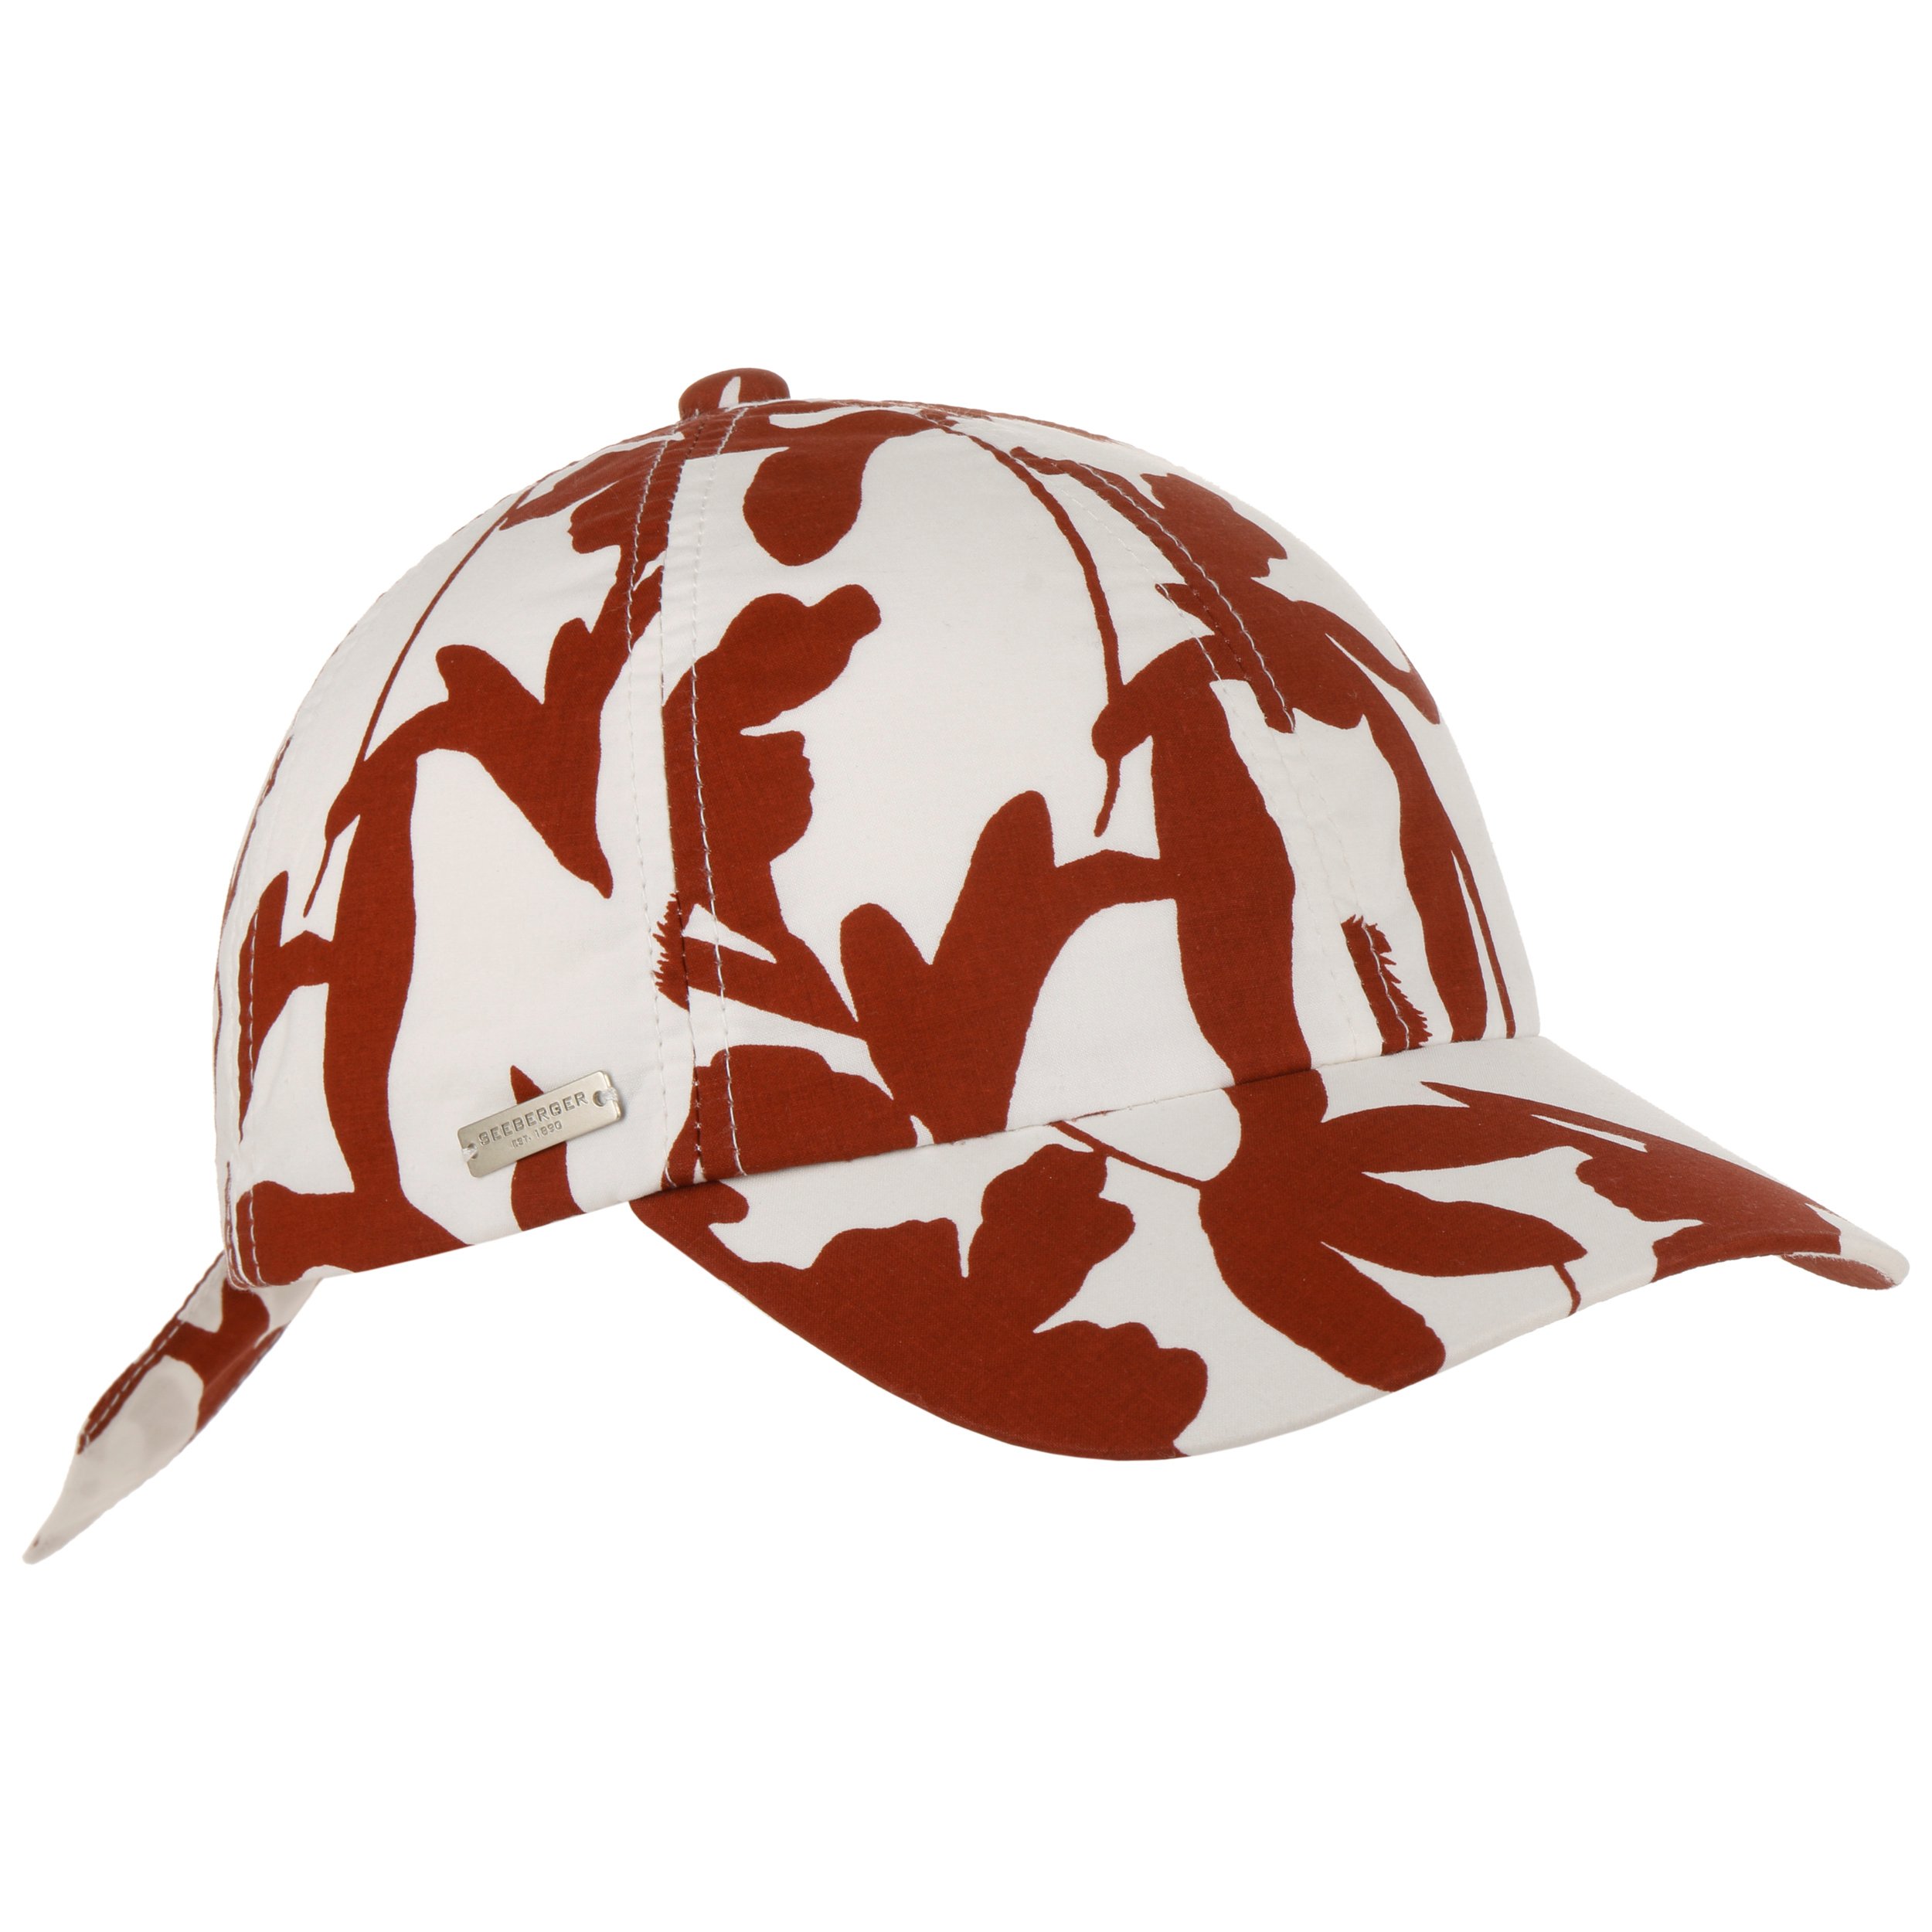 Twotone Flower Cap 29,95 - by € Seeberger